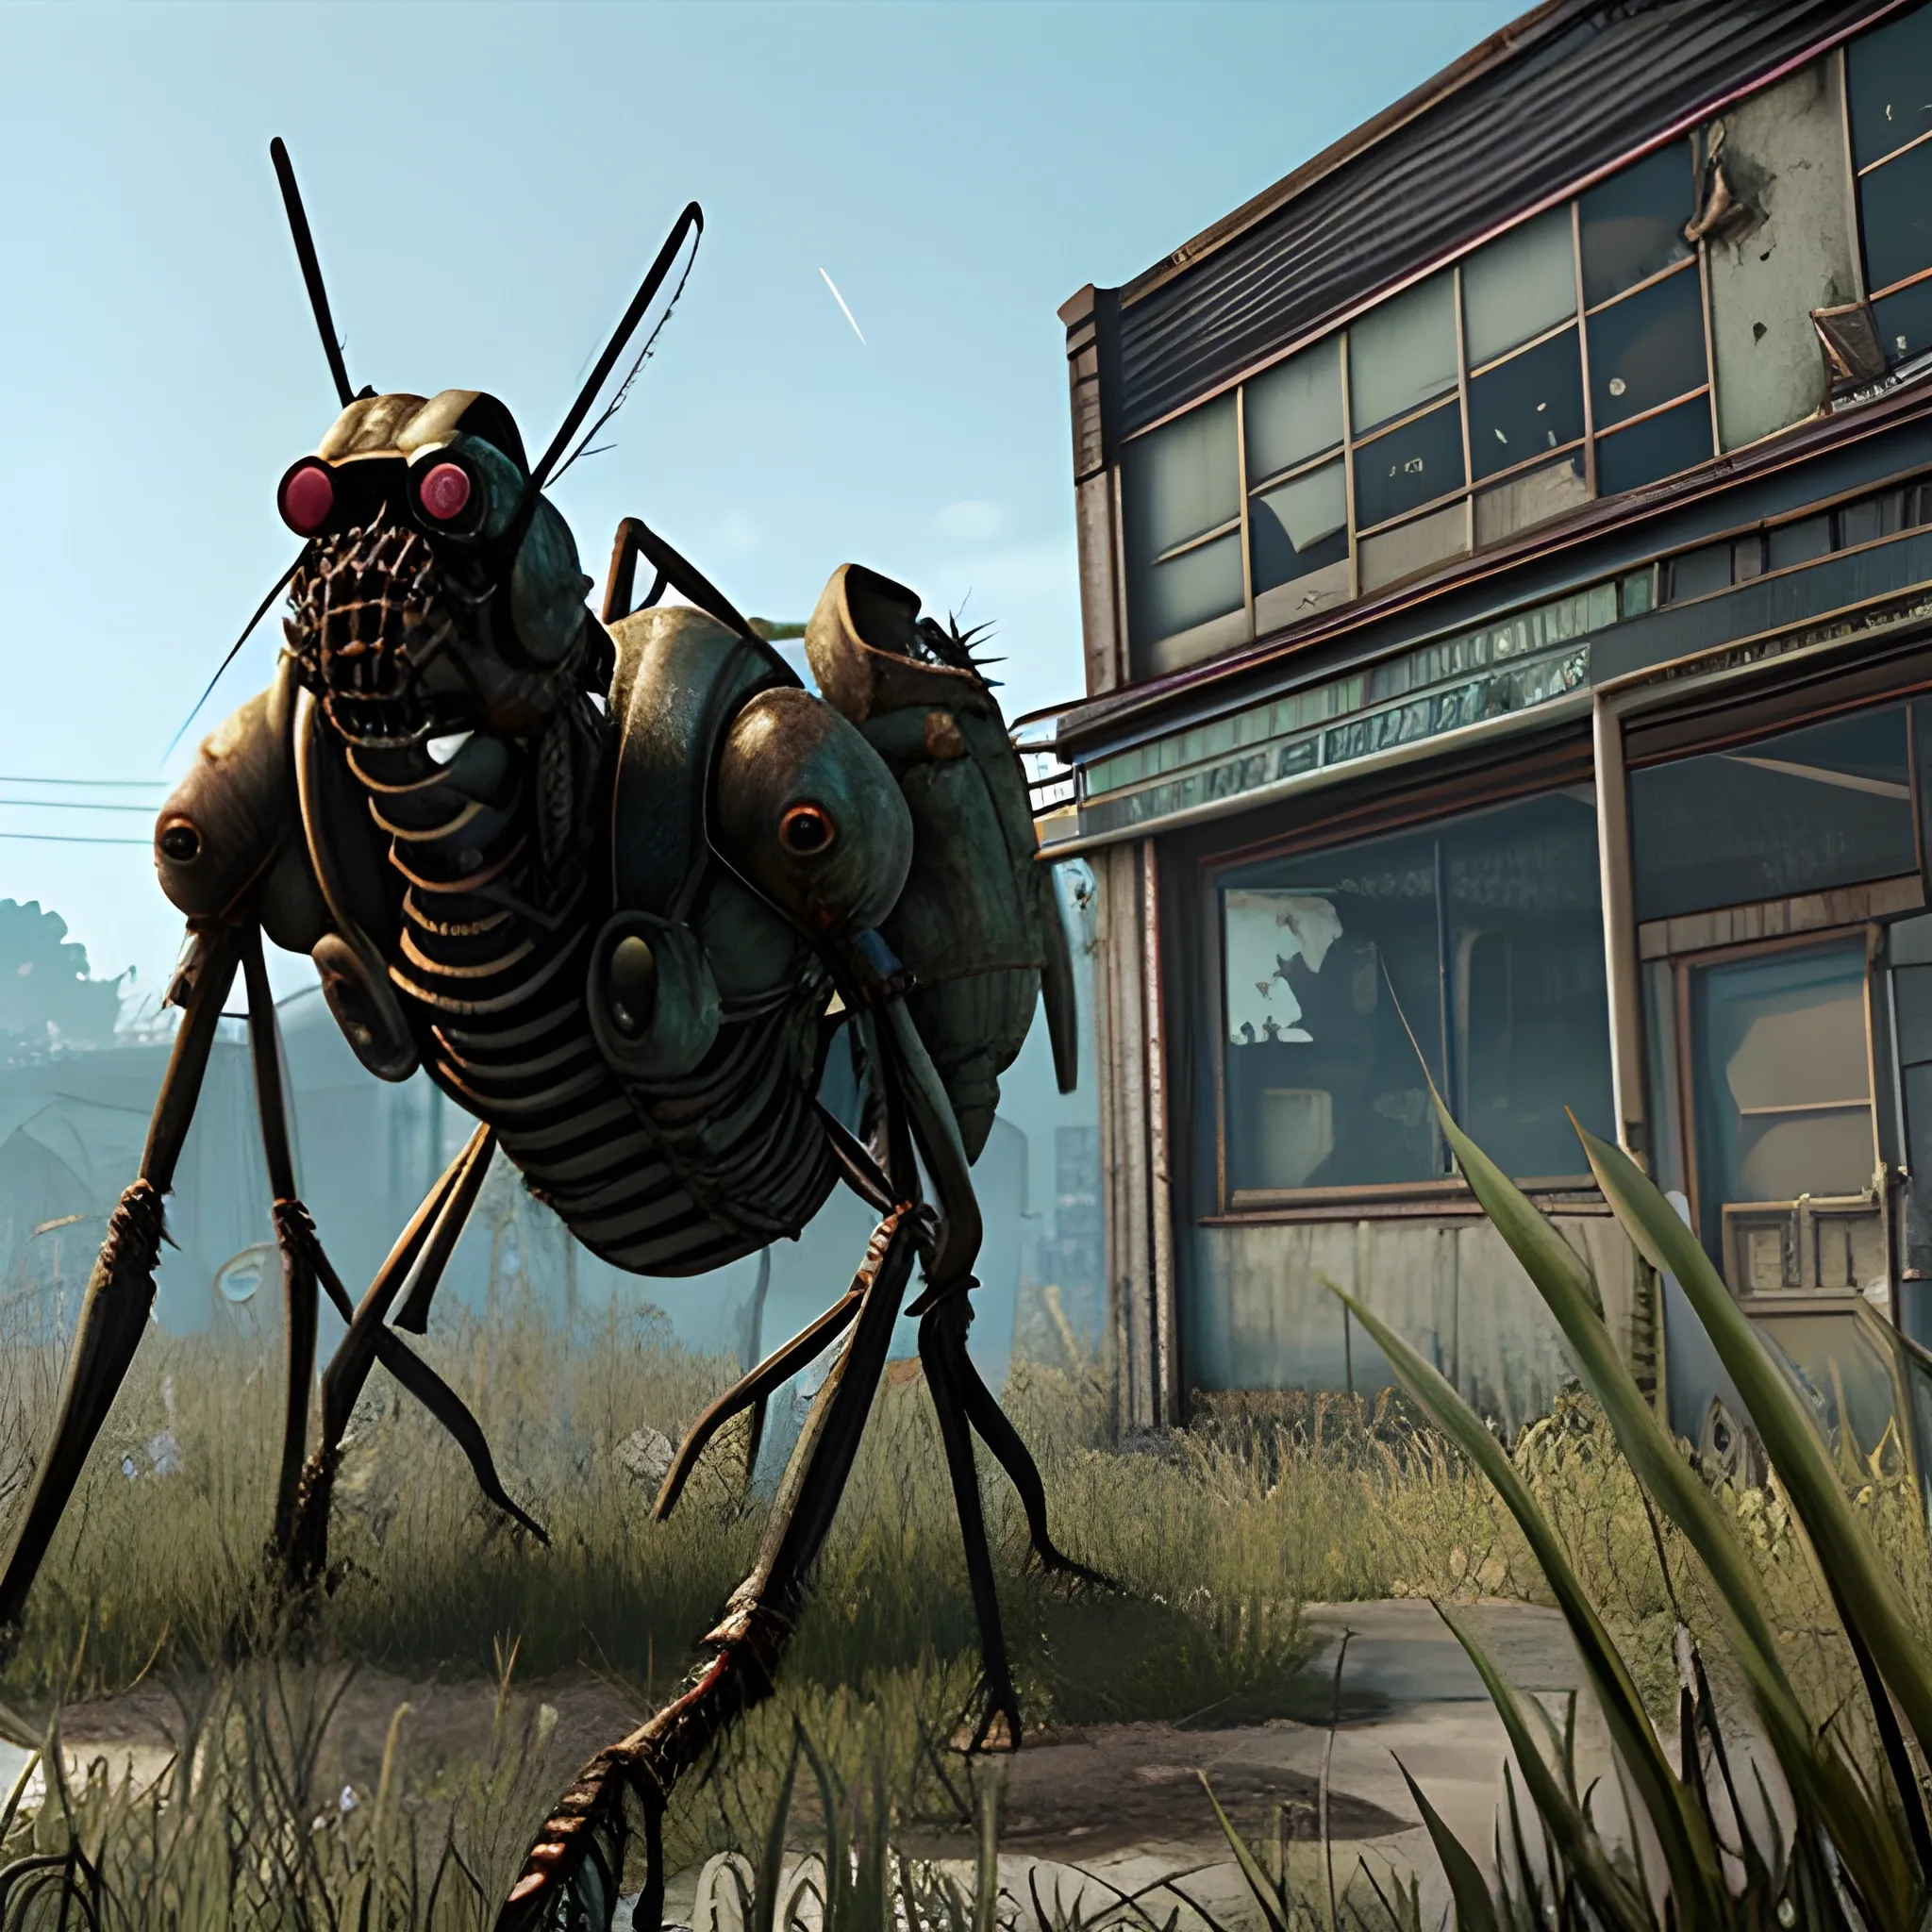 fallout 4, a very large mutated mosquito all by itself with mutated plants in the background